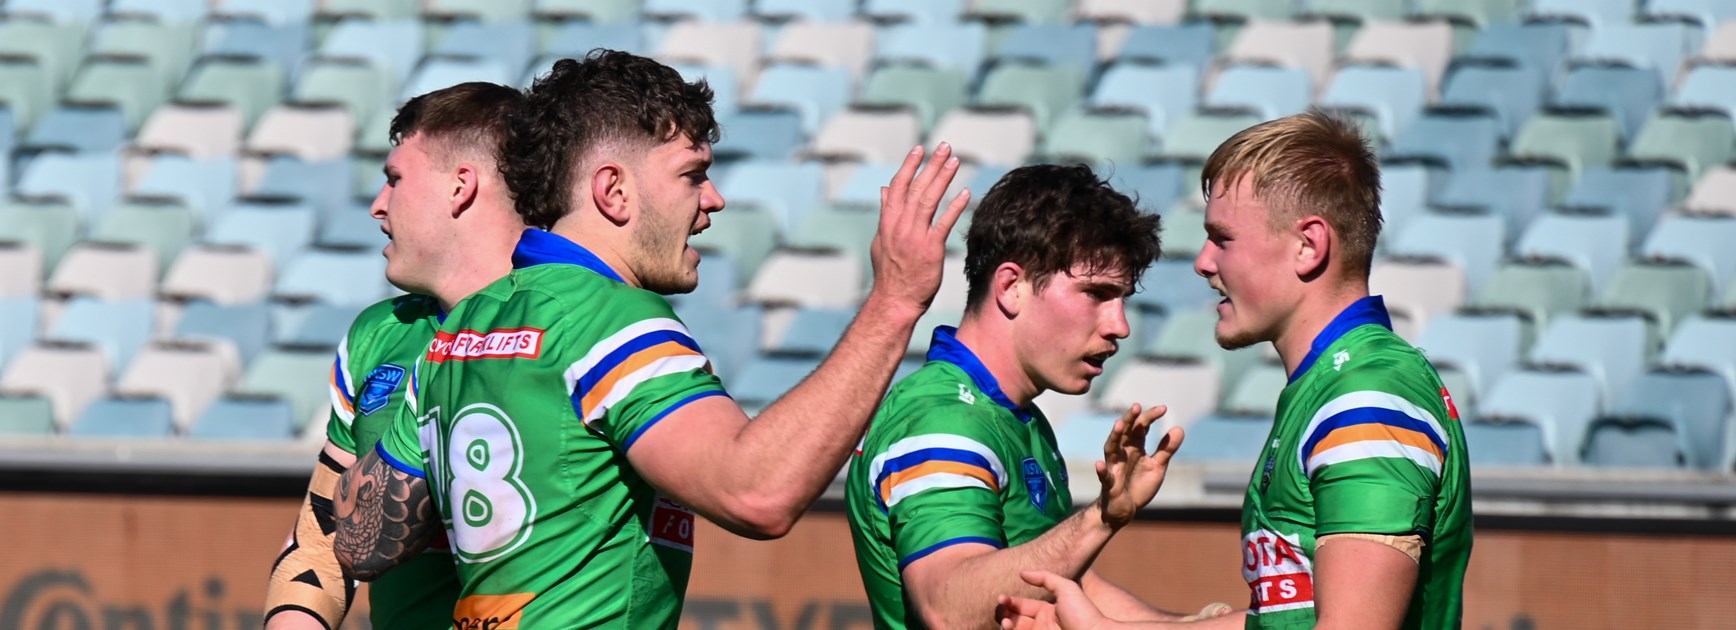 Raiders Flegg side record impressive win over Panthers